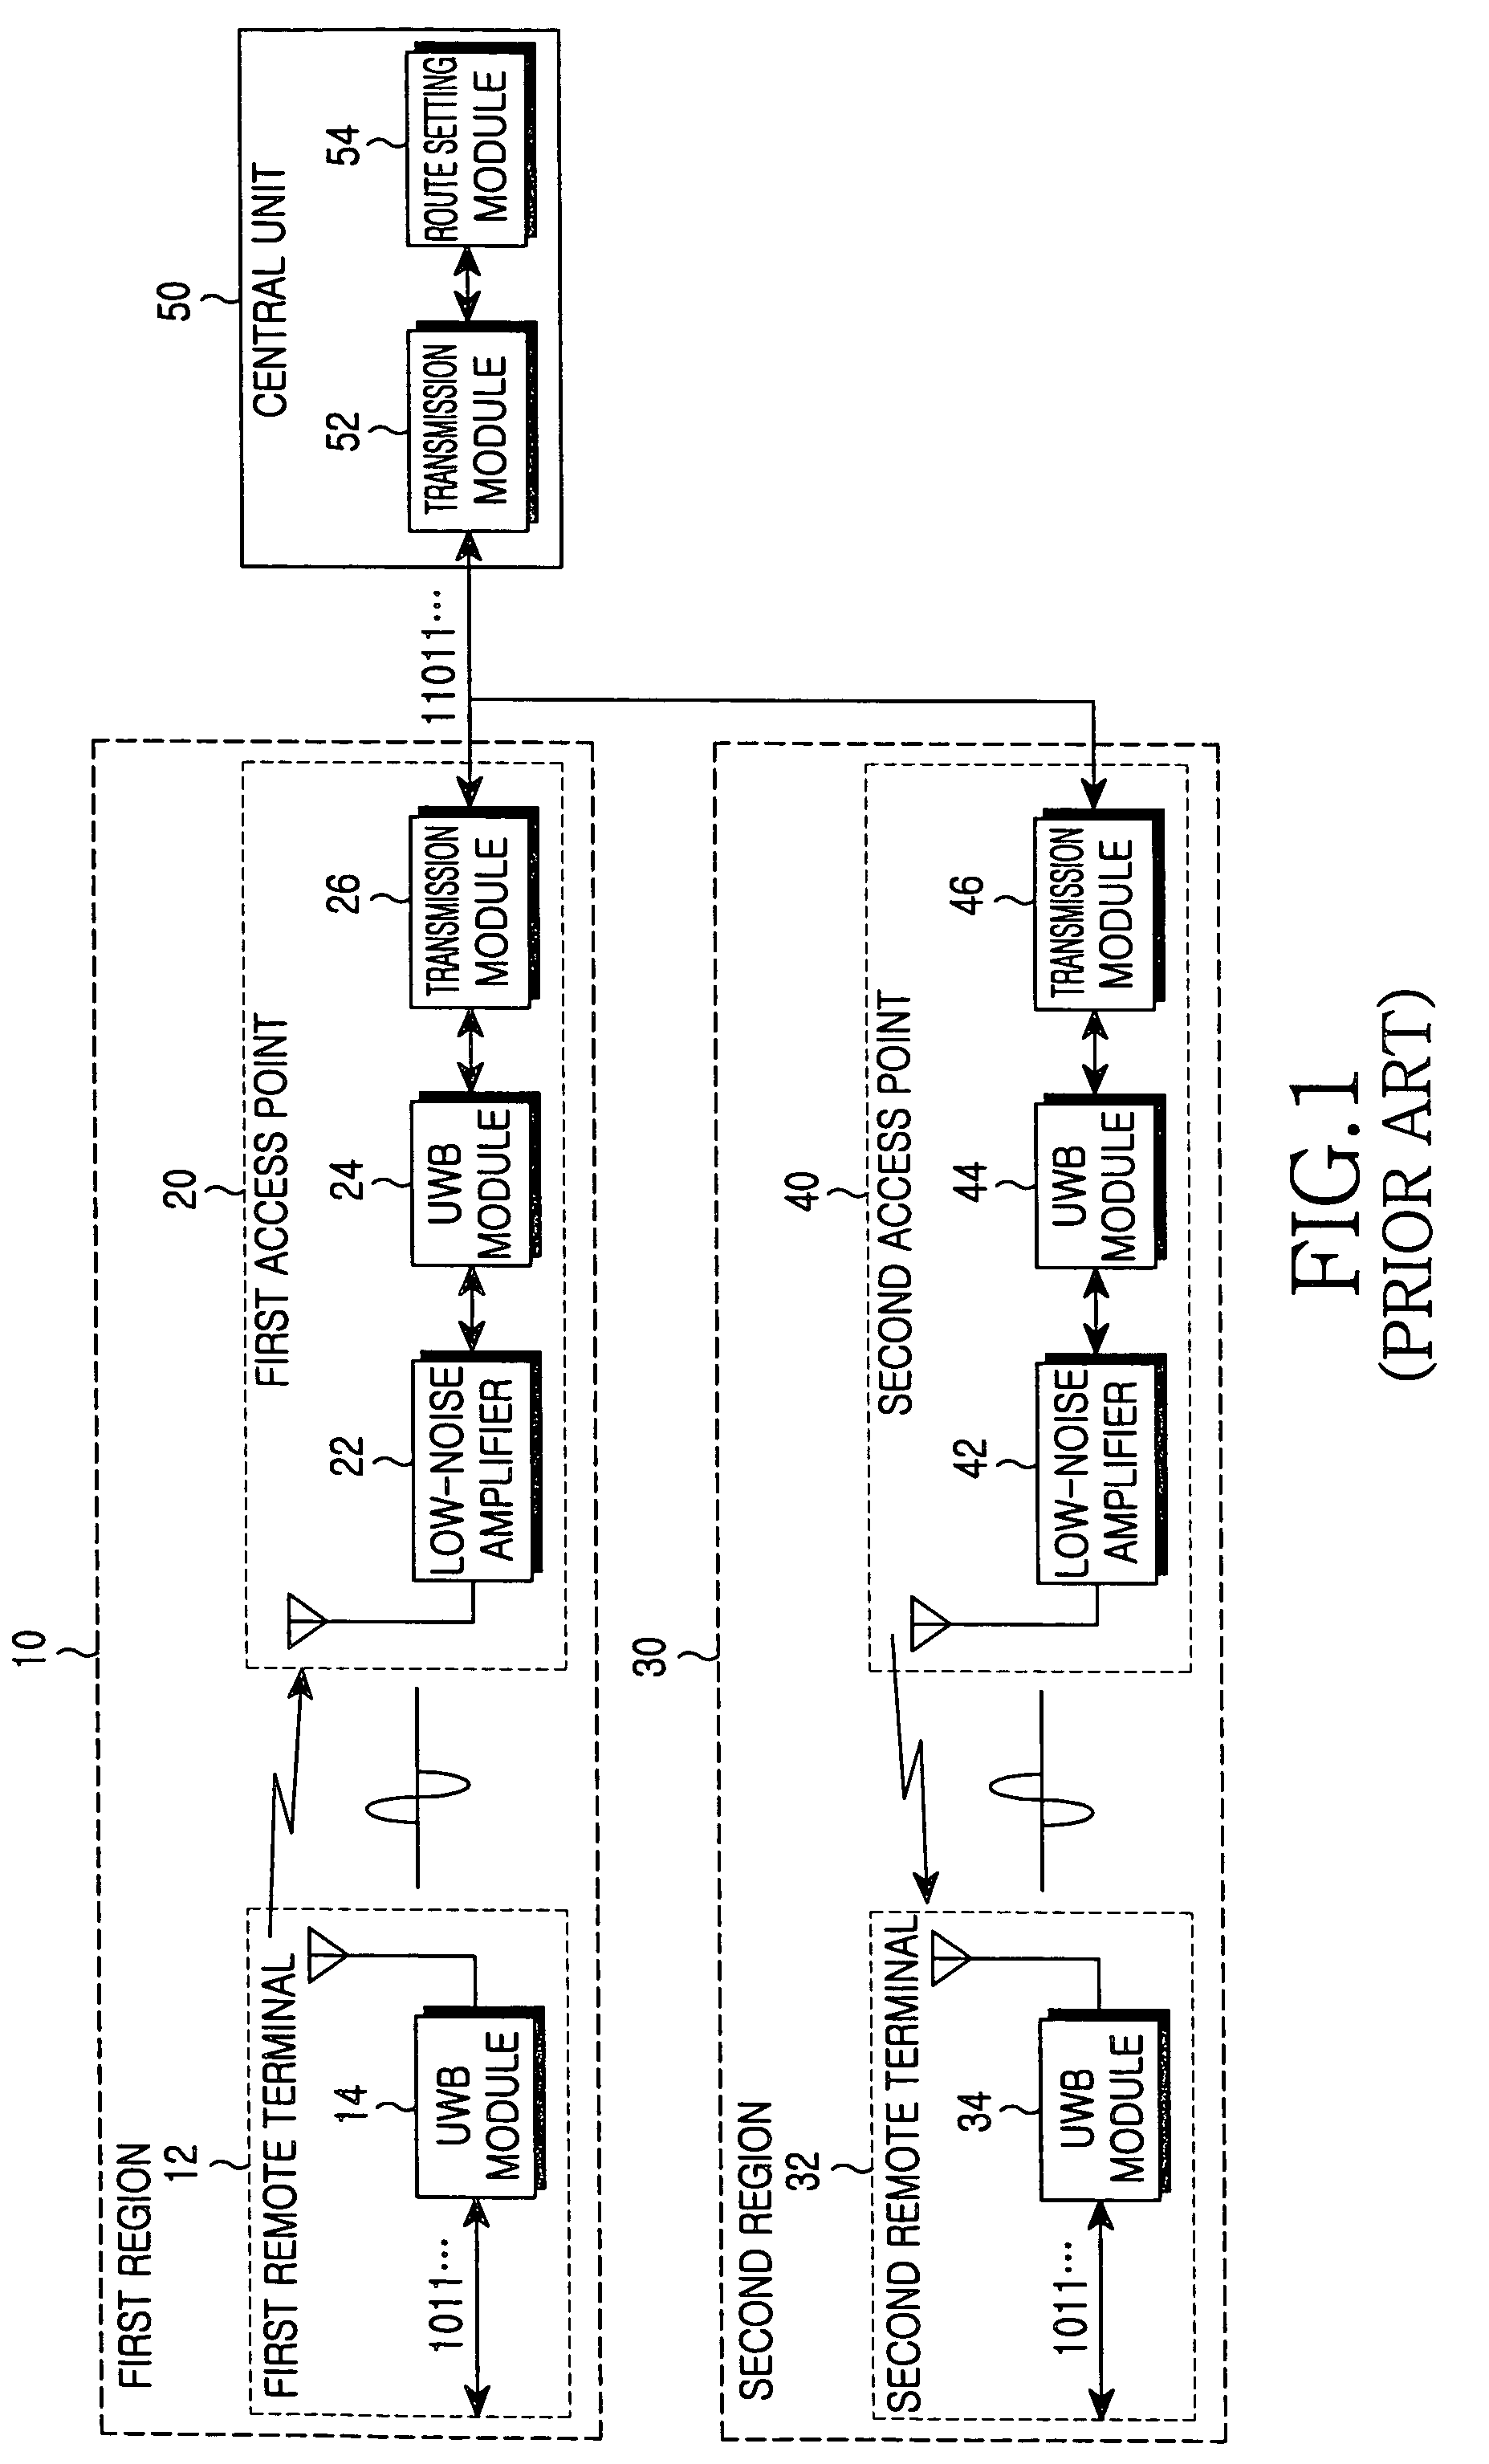 Indoor local area network system using ultra wide-band communication system